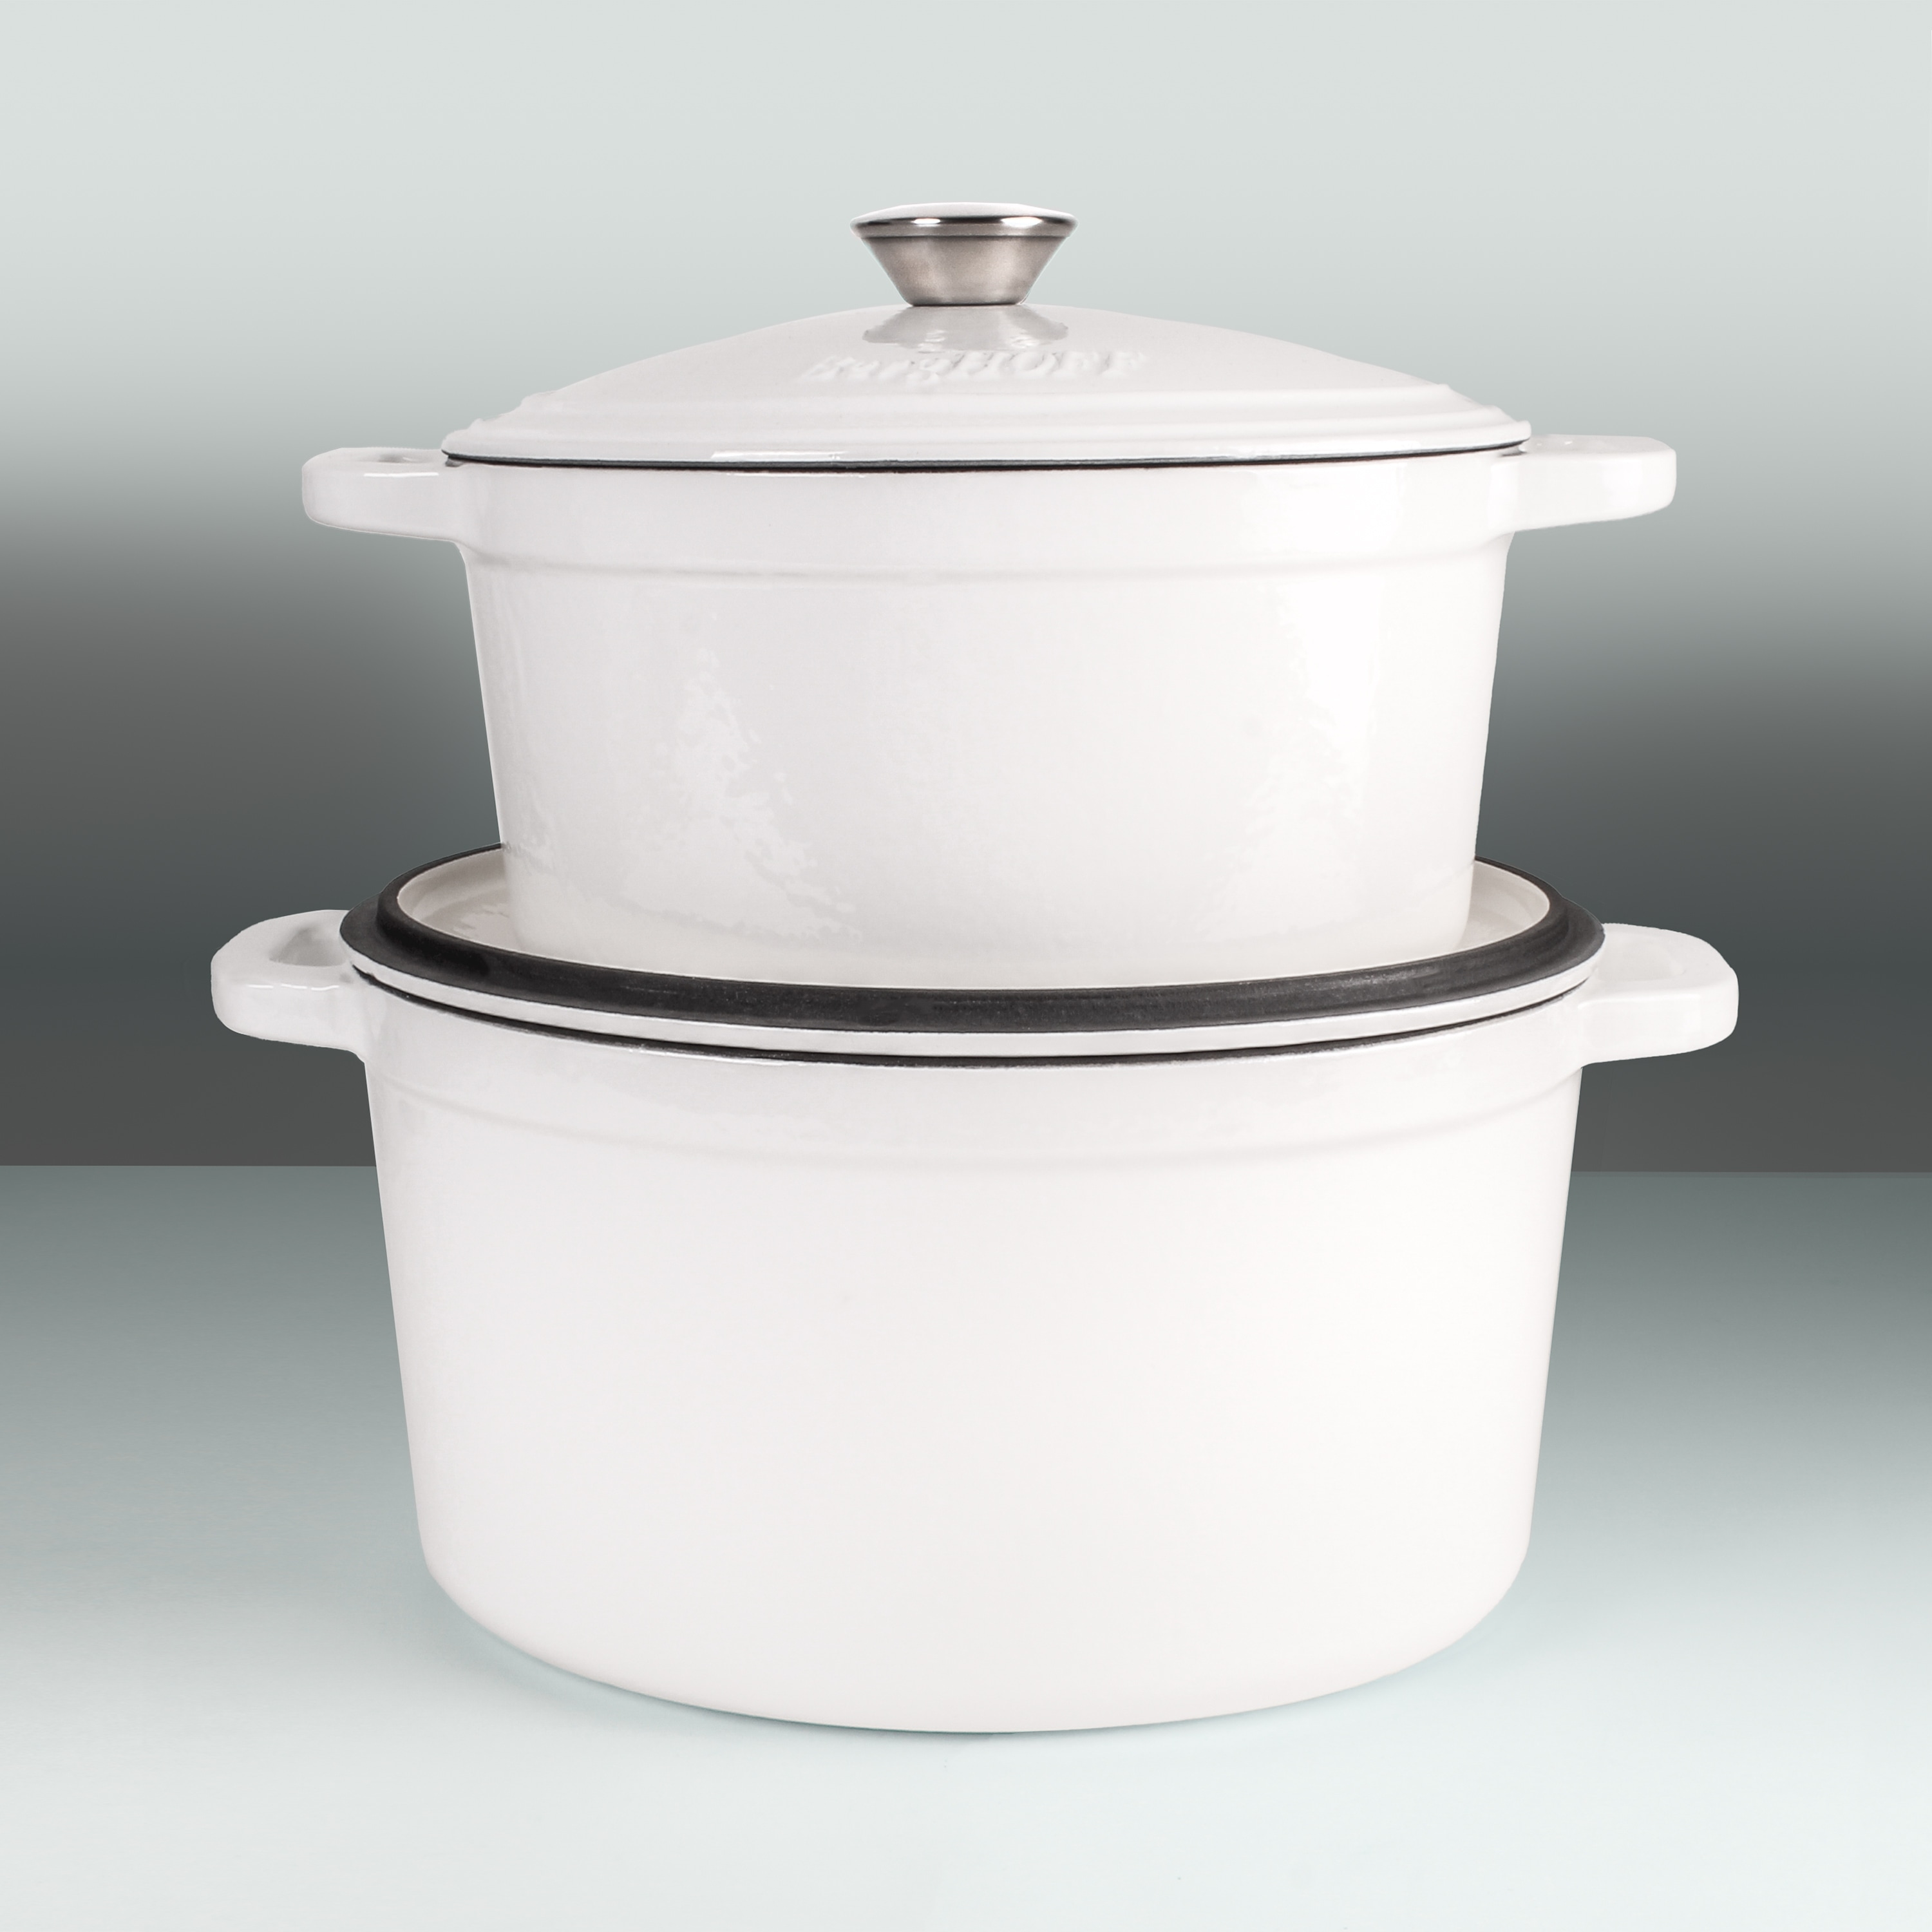 https://ak1.ostkcdn.com/images/products/is/images/direct/e568651413d39f7efccae76ecf9d50643f848cb7/Neo-4pc-Cast-Iron-Set-3qt-Covered-Stockpot-%26-7qt-Covered-Stockpot-White.jpg